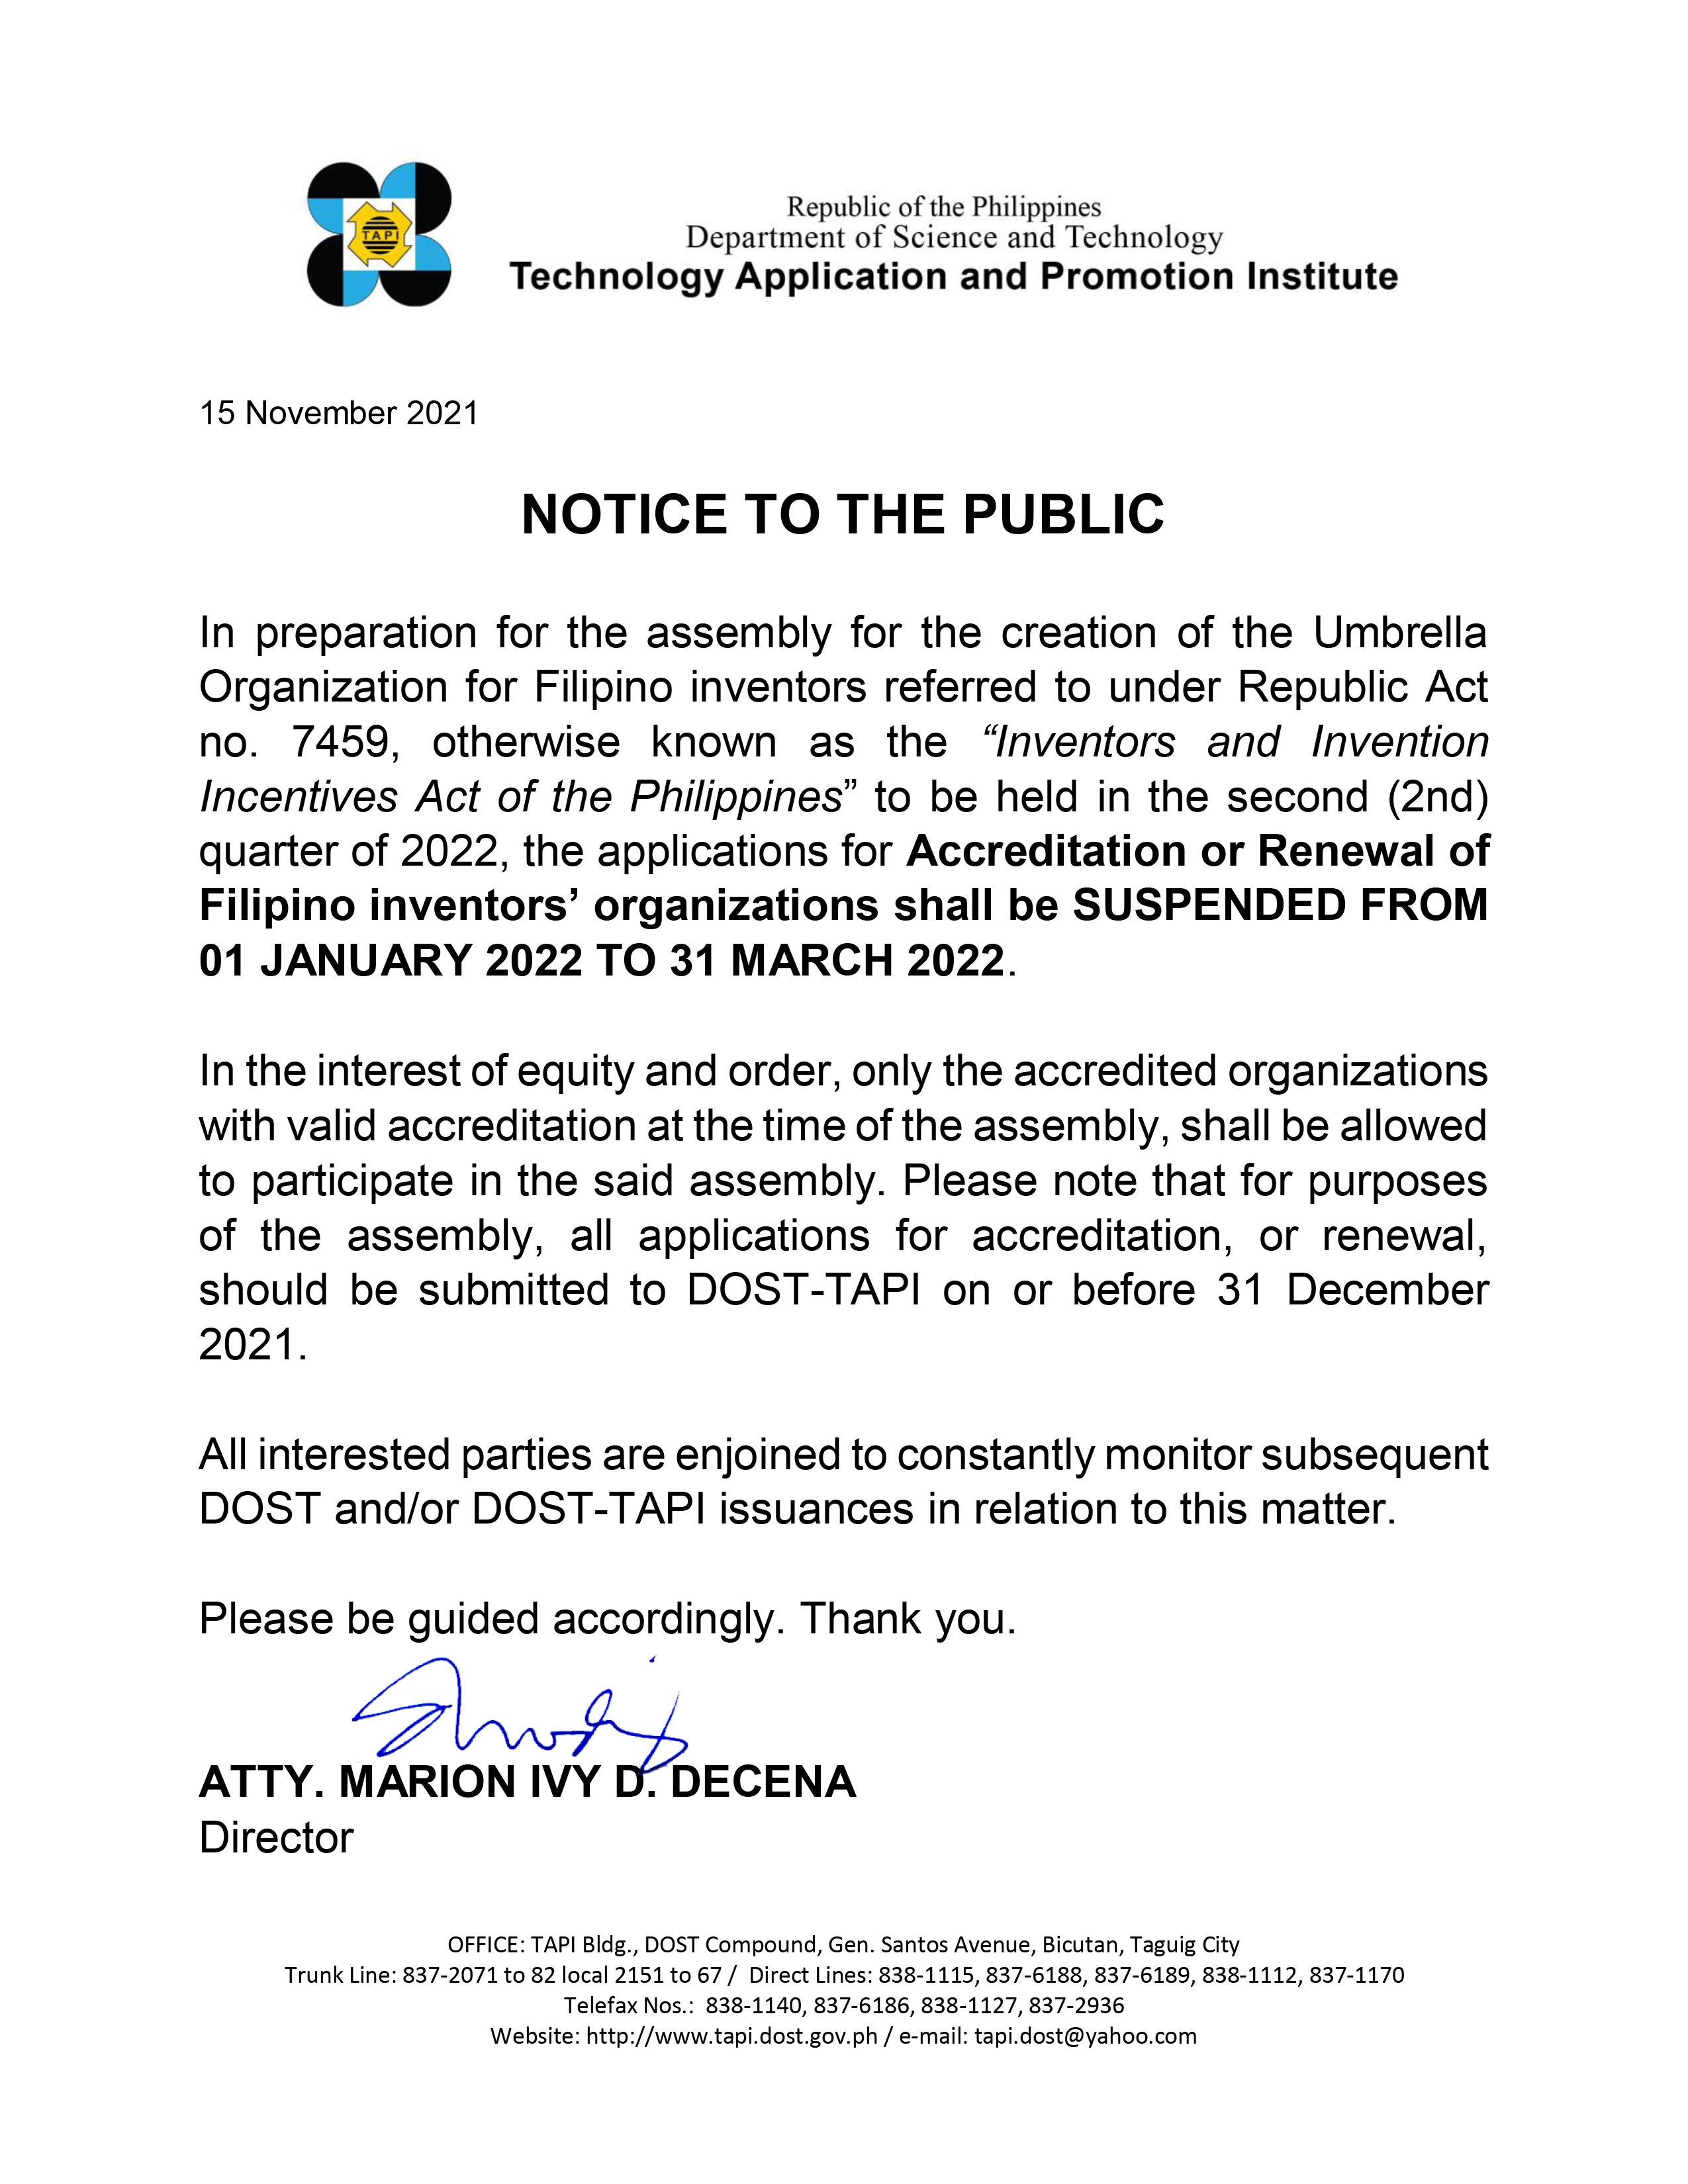 Notice to the Public with Letterhead signed MIDD